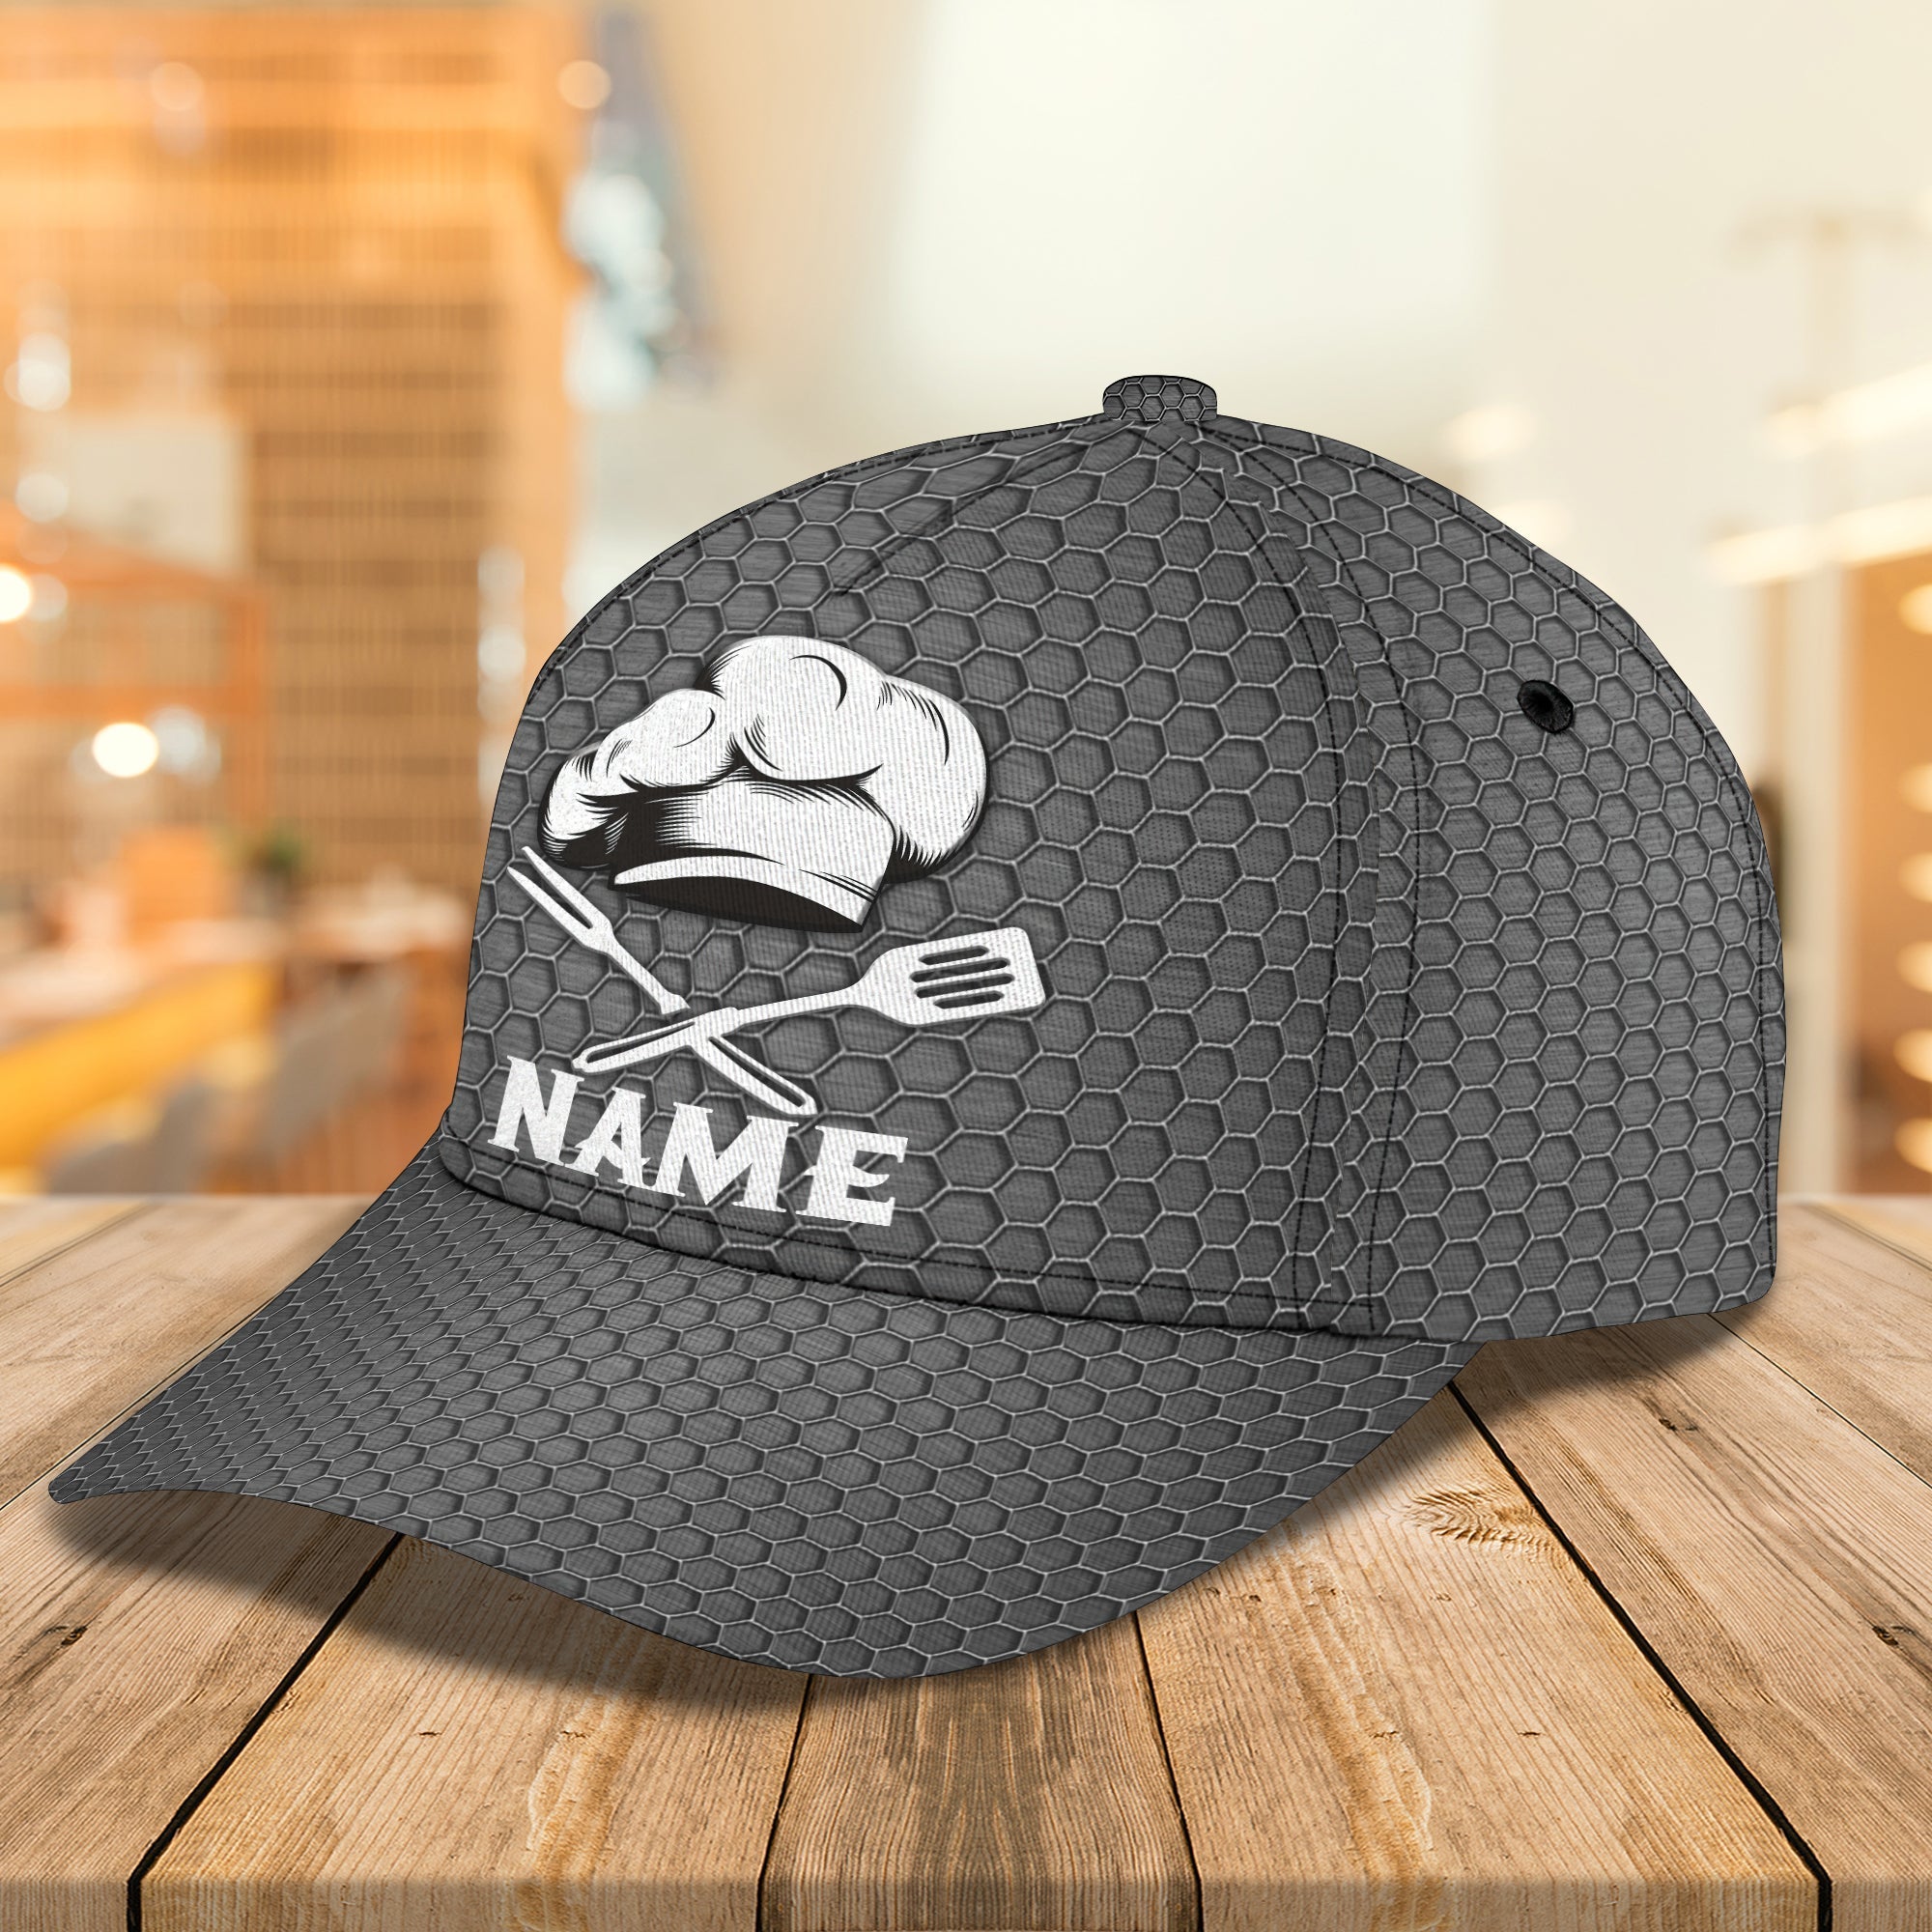 Customized 3D Full Printed Chef Cap/ Baseball Chef Hat/ Classic Cap For A Master Chef/ Cooking Lover Gift